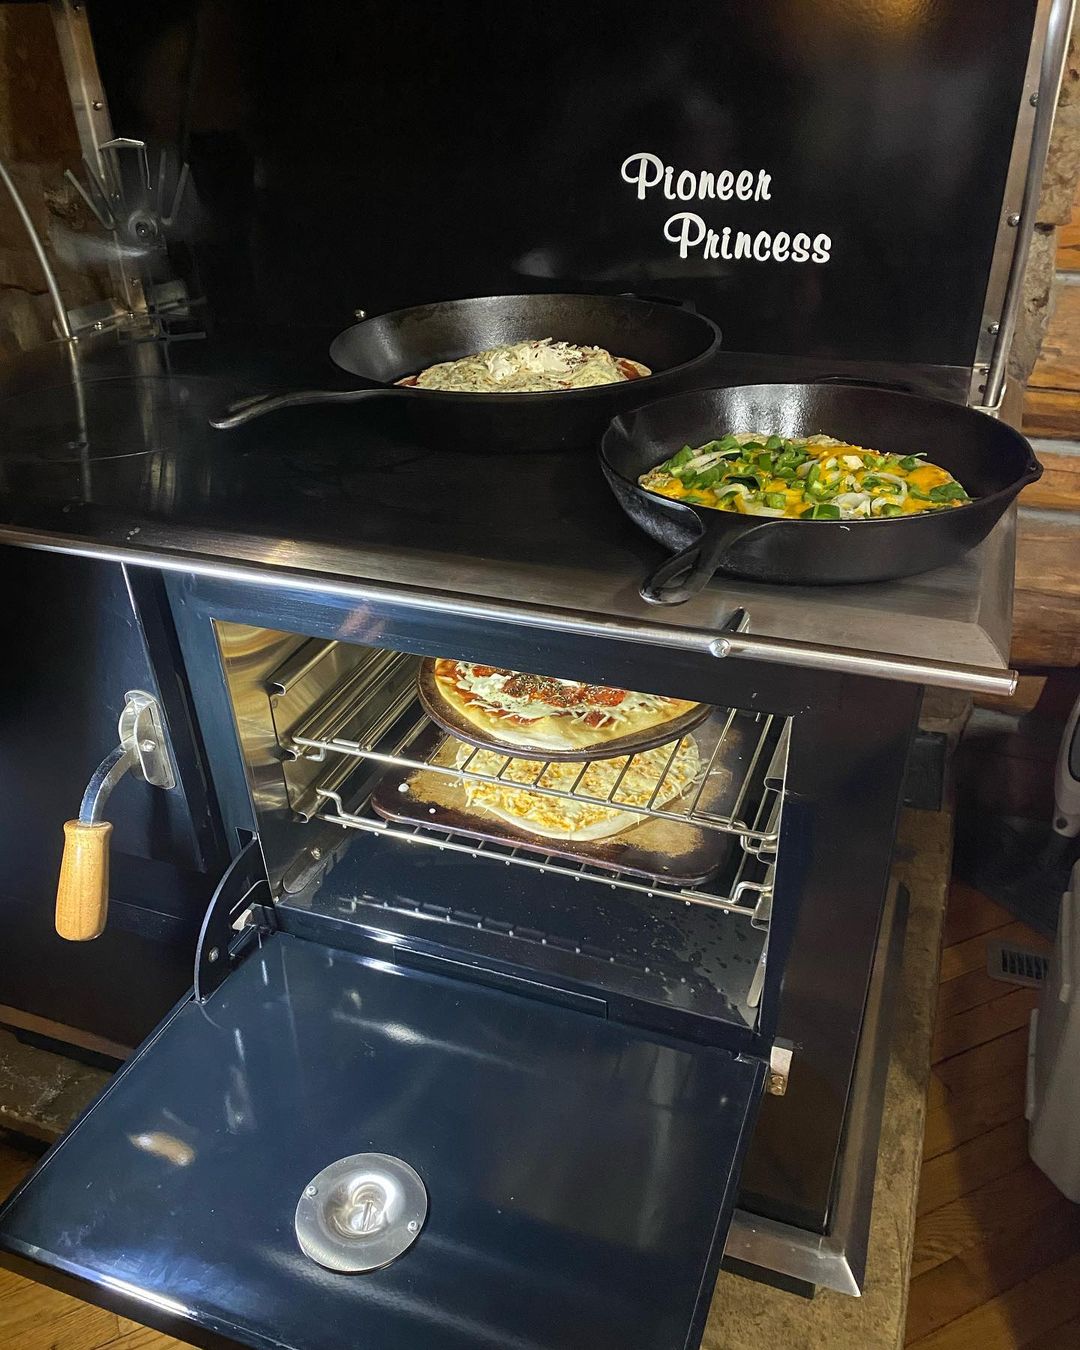 how to cook on pioneer princess ideas